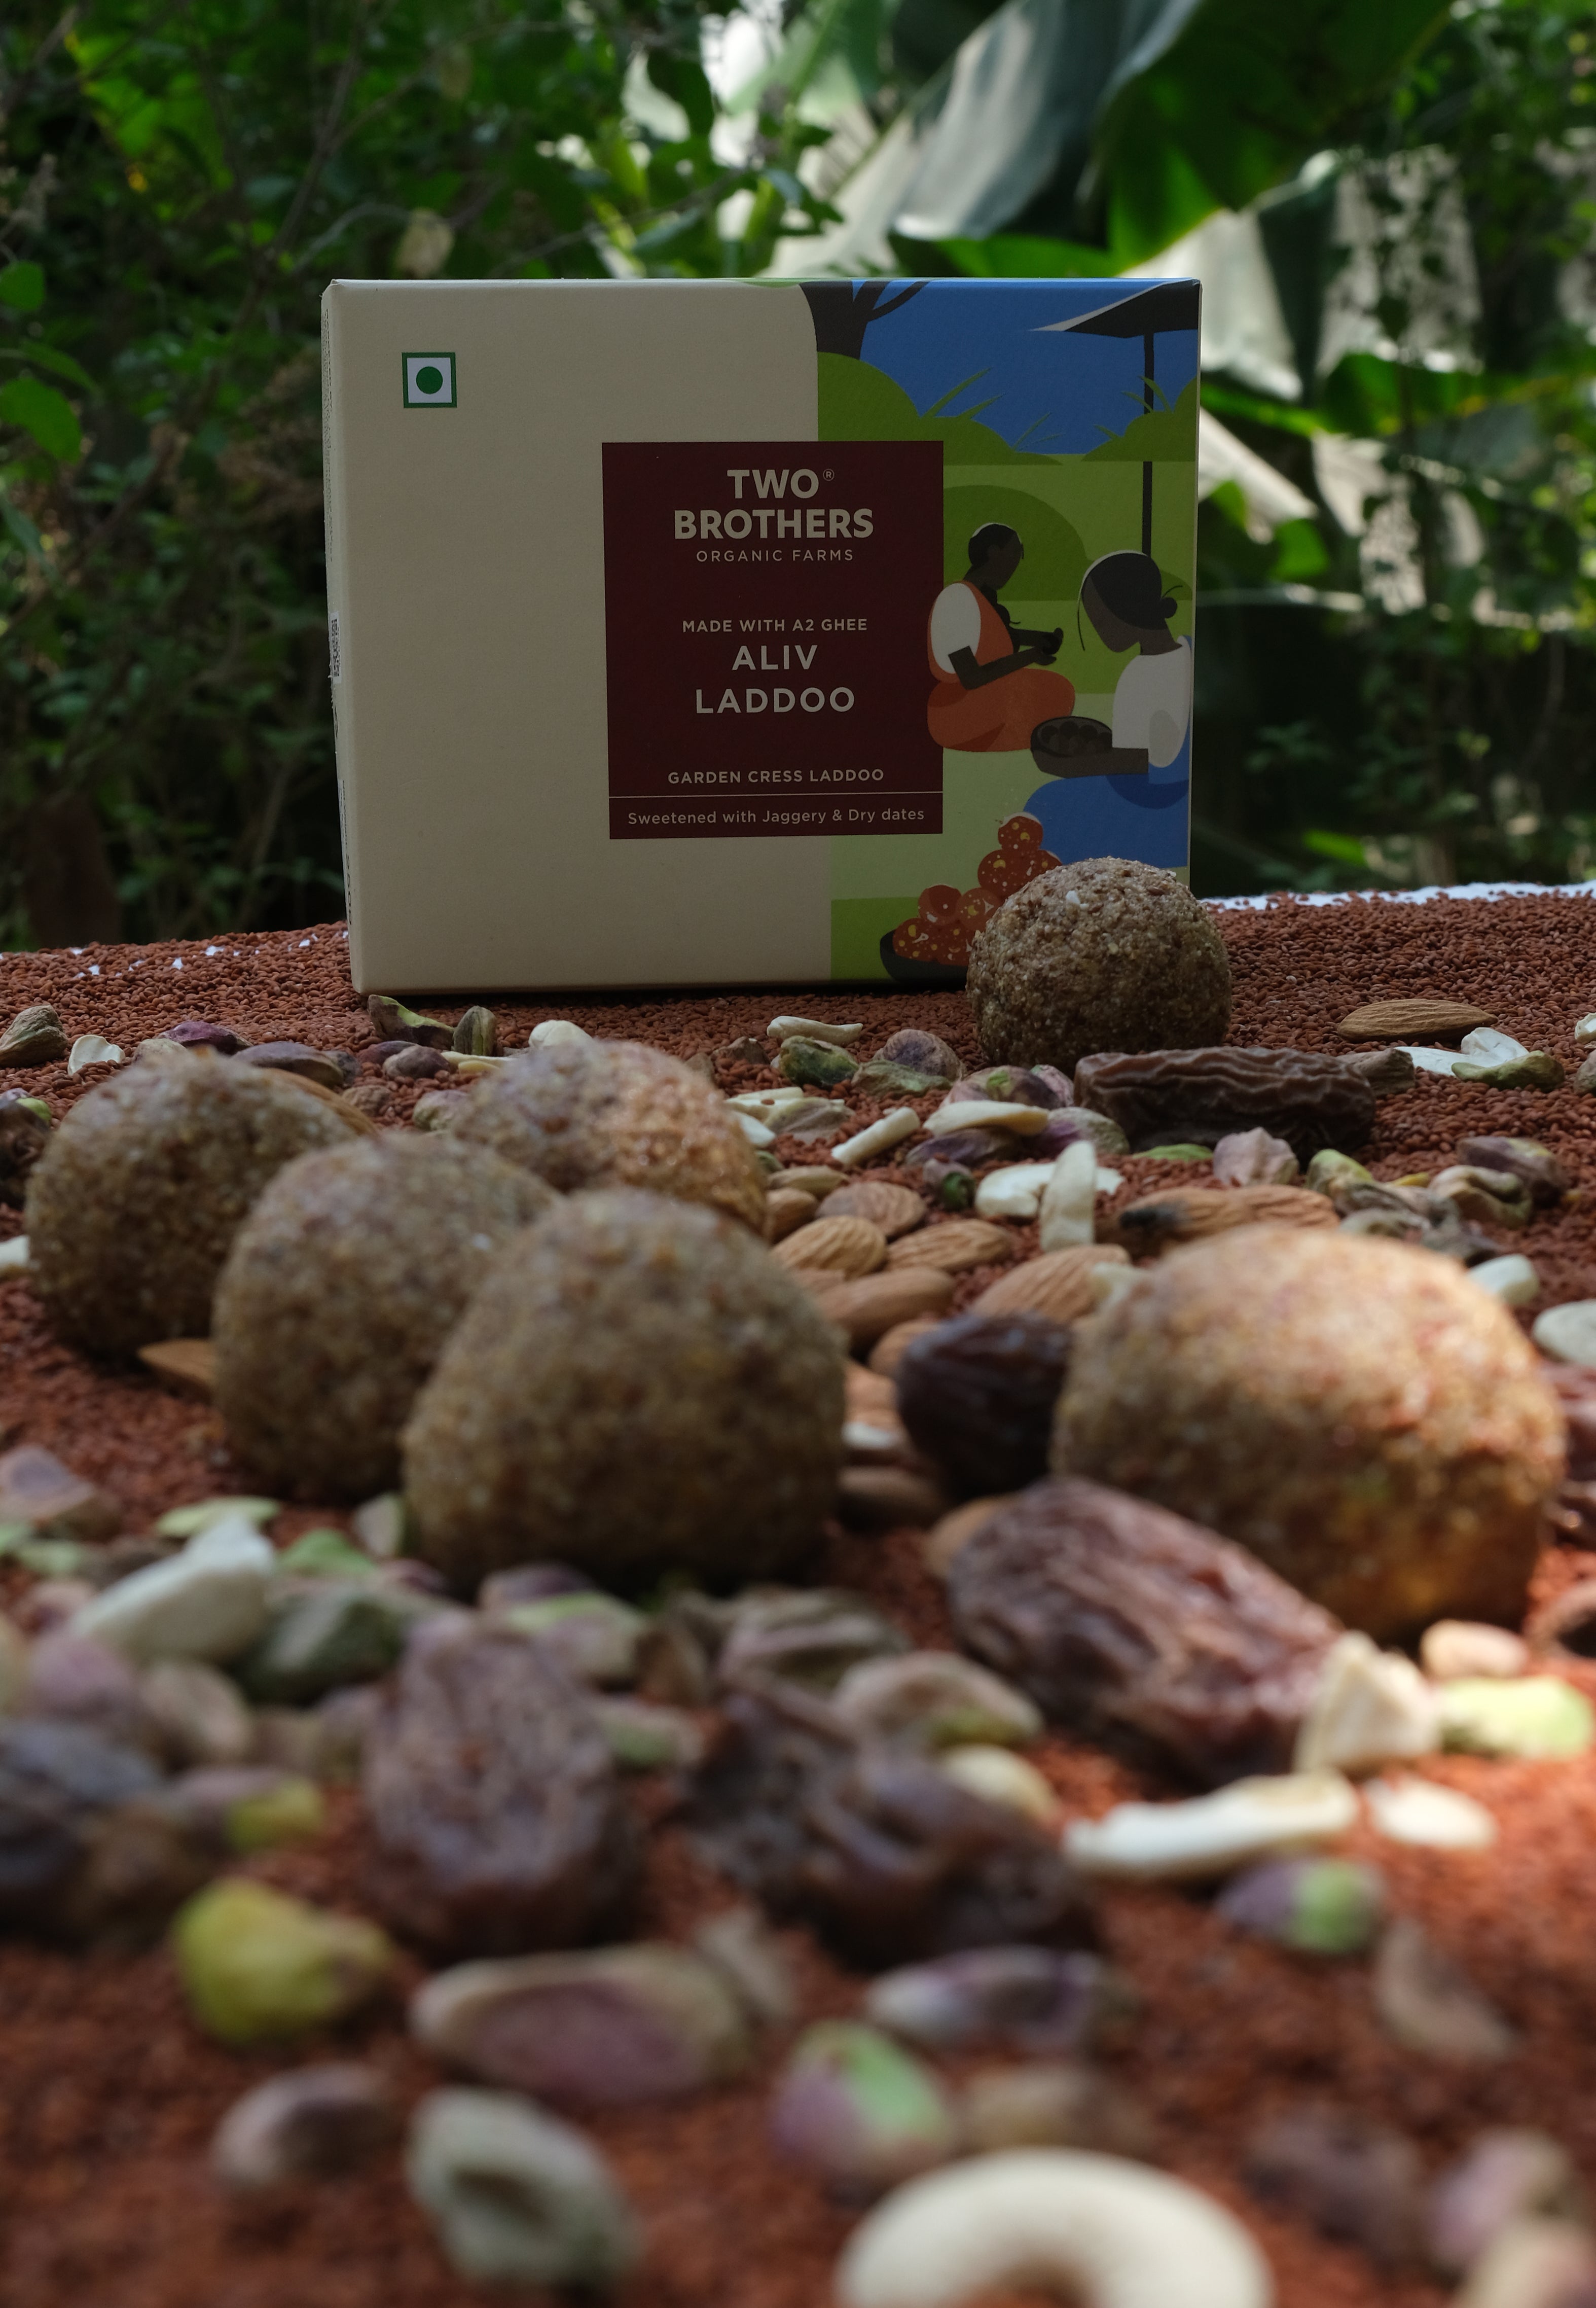 Aliv Laddoos Made Using Halim Seeds, Pistachio, Cashew Nuts, Dates at Two Brothers Organic Farms